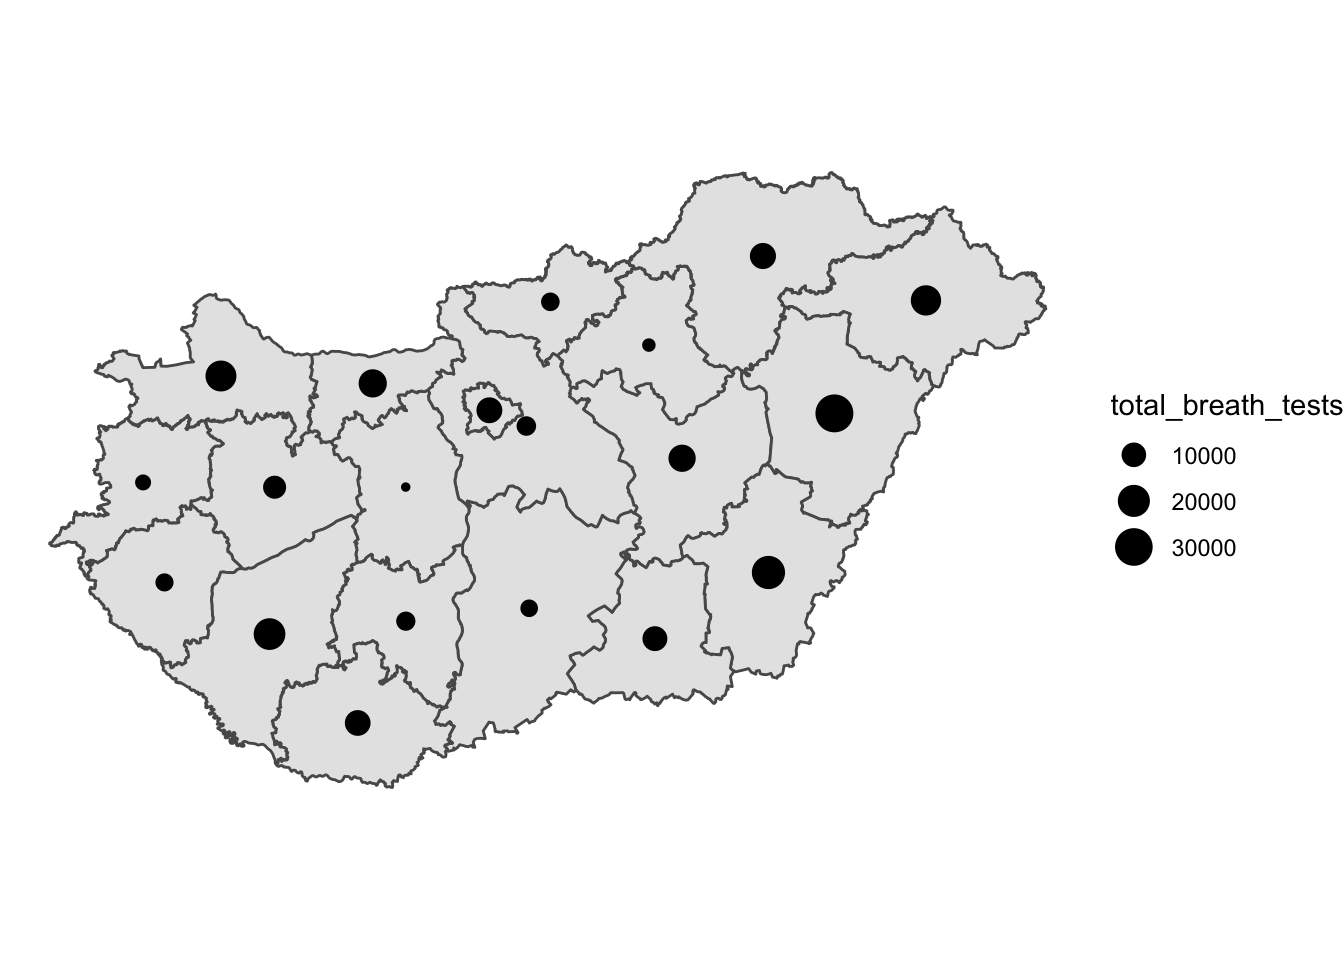 The map of Hungary has lost its bright colours, and now has a black border between counties. The counties are all shaded the same shade of grey, and each one has a solid black circle in its centre. The circles vary in sizes, from a small point to much larger. A legend on the right, labeled 'total breath tests', shows three example circles and corresponding numbers, ten thousand, twenty thousand, and thirty thousand. The largest circles in counties on the map seem to be a similar size to the thirty thousand example circle.